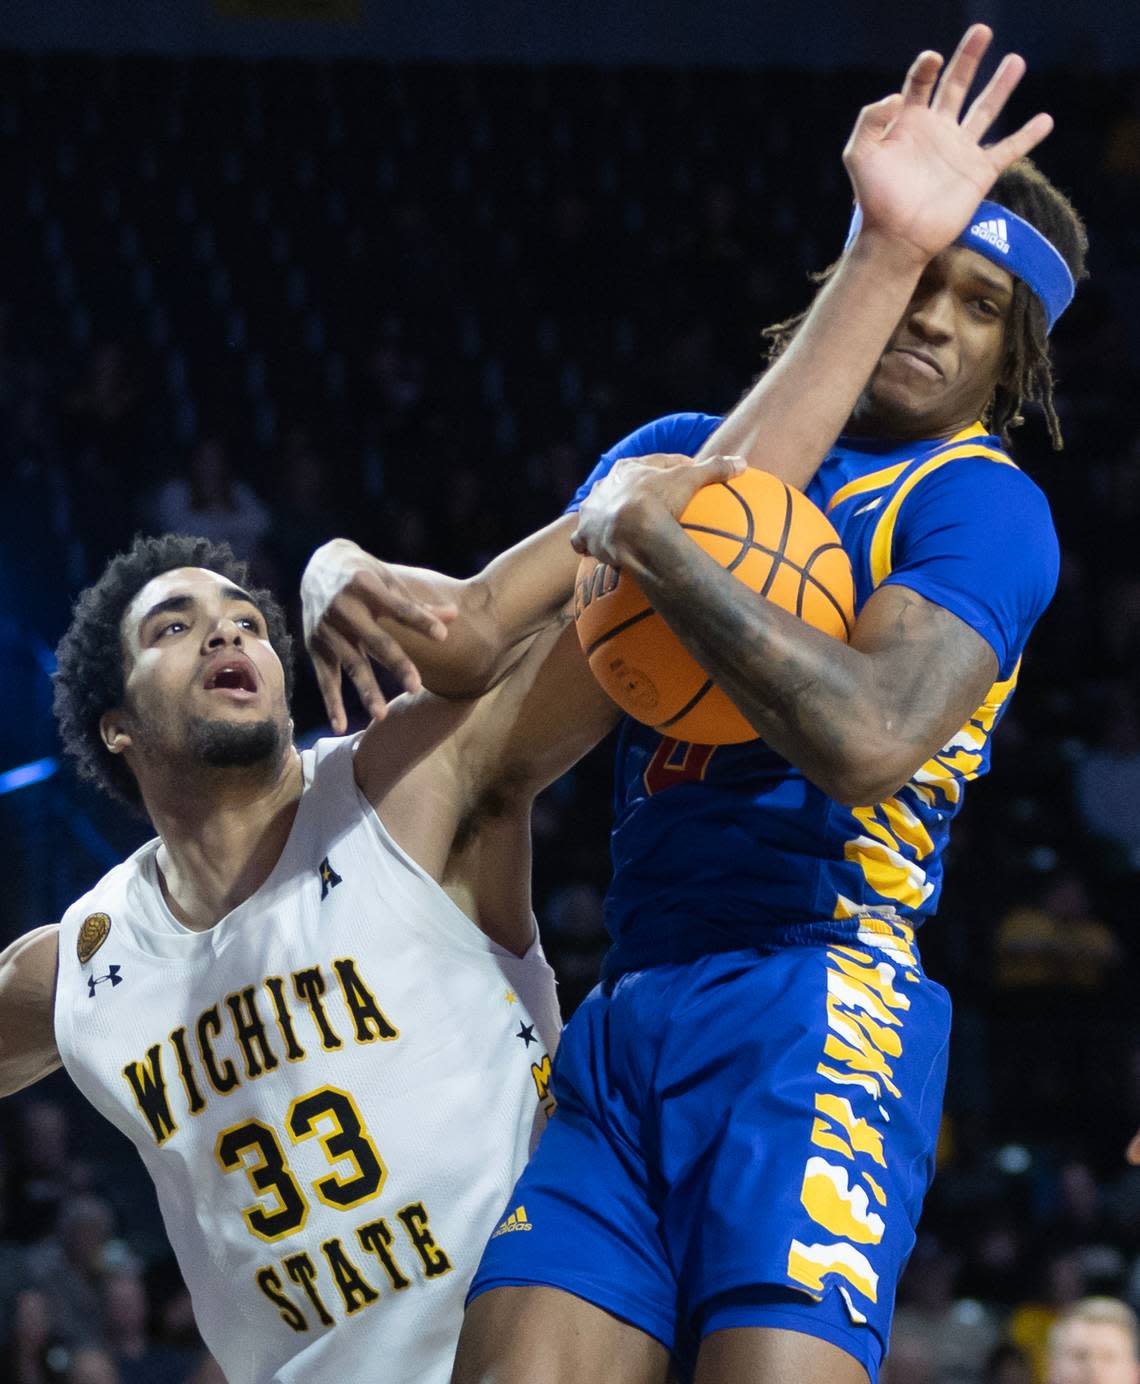 Wichita State’s James Rojas battles Tulsa’s Jesaiah McWright for rebound during the first half of their game on Saturday at Koch Arena.